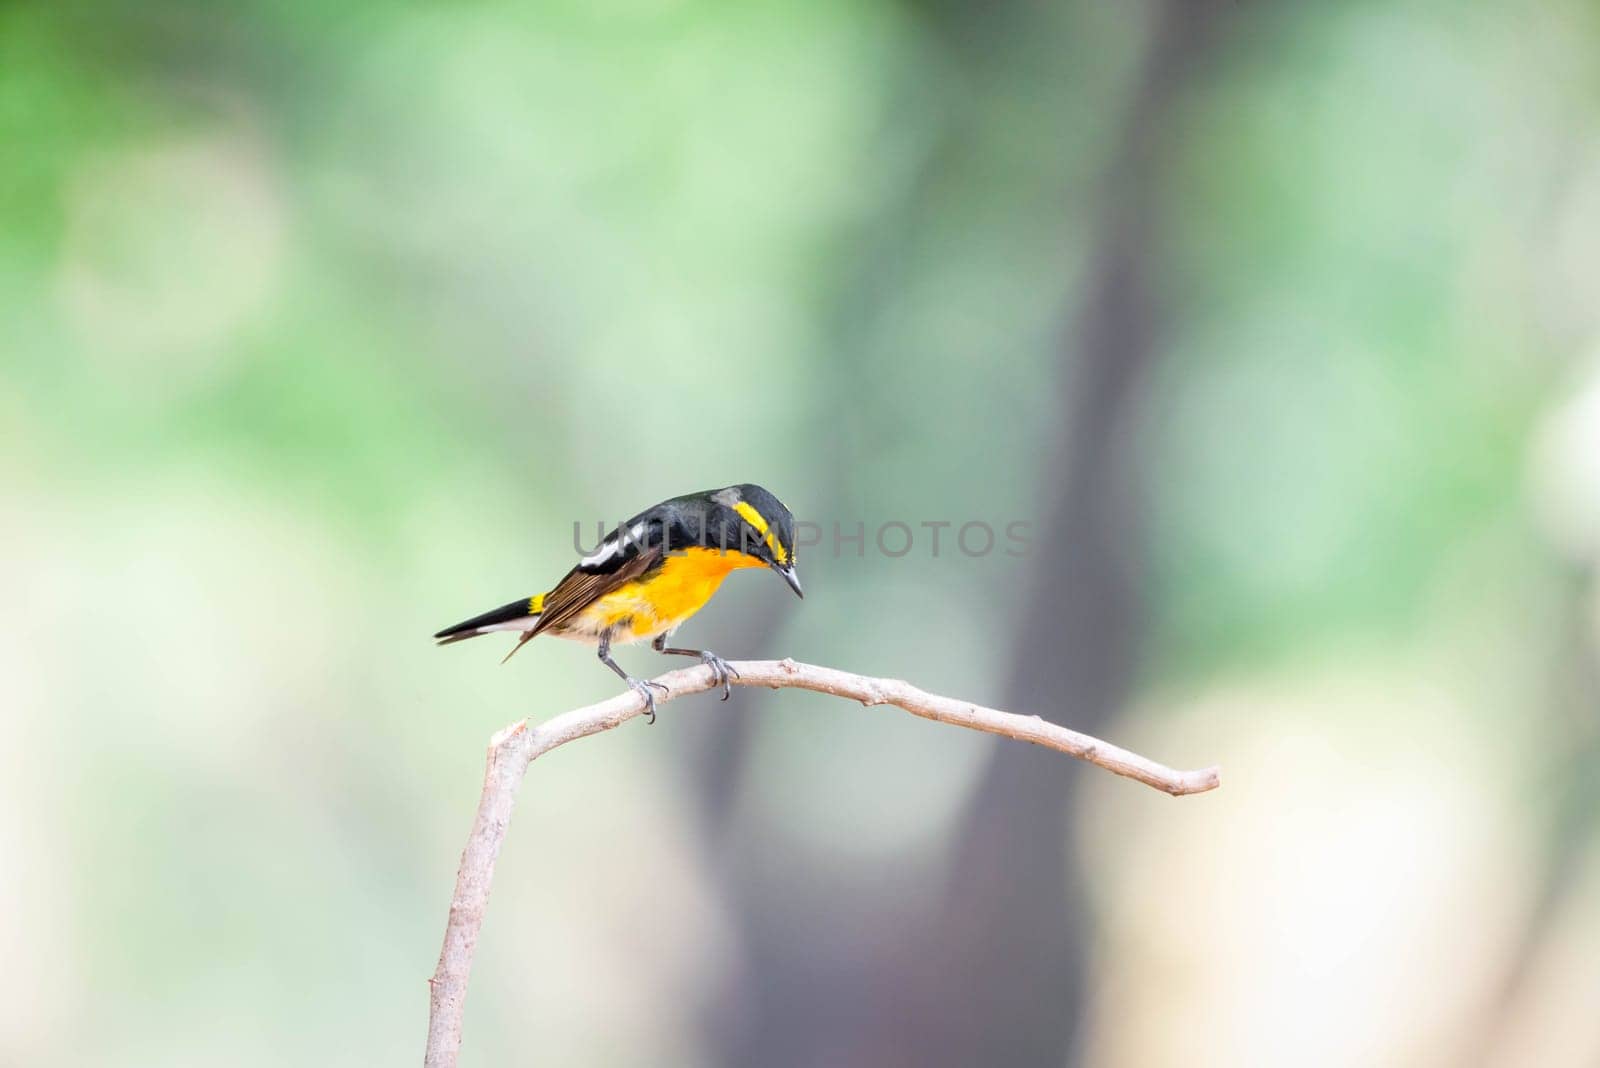 Bird (Narcissus Flycatcher, Ficedula narcissina) male black, orange, orange-yellow color perched on a tree in a nature wild and risk of extinction